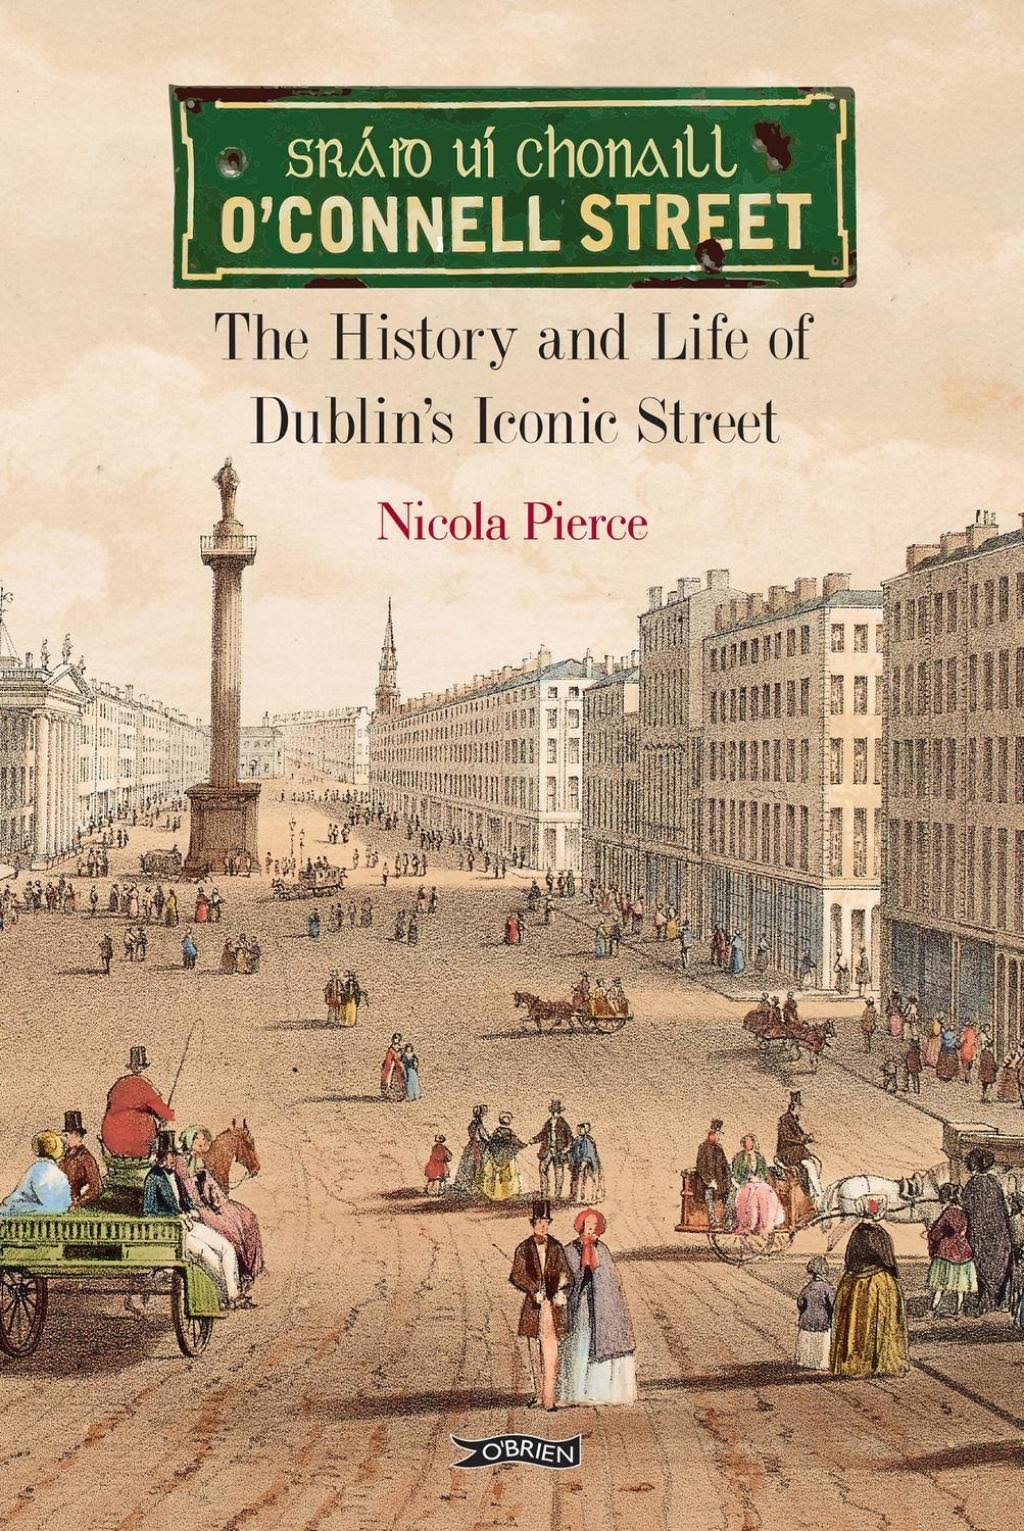 O'Connell Street: The History and Life of Dublin's Iconic Street [Book]